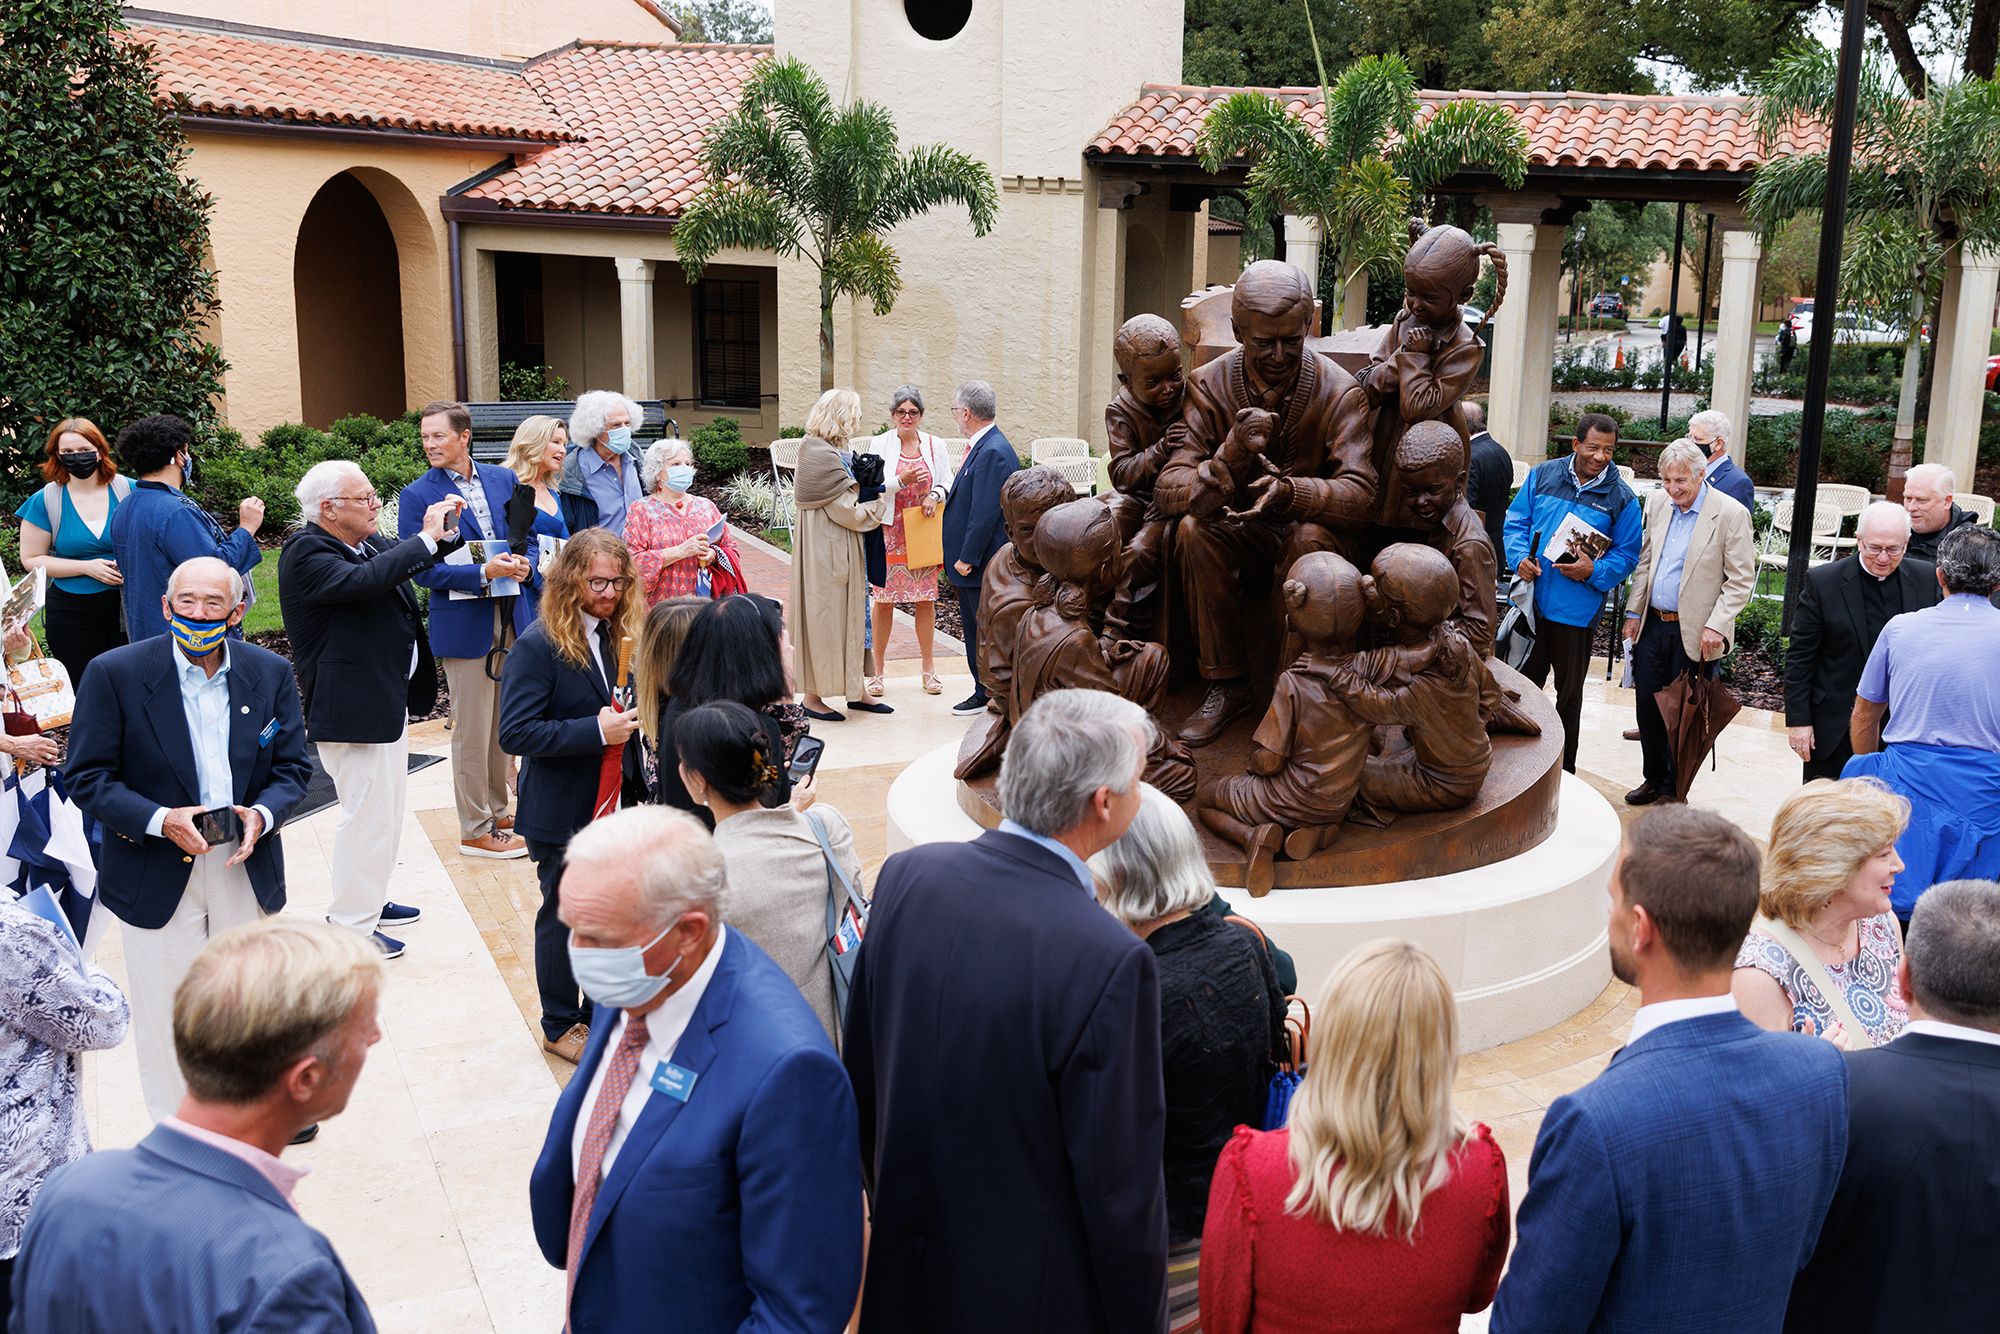 Gathering by the Mister Rogers sculpture for the unveiling event.